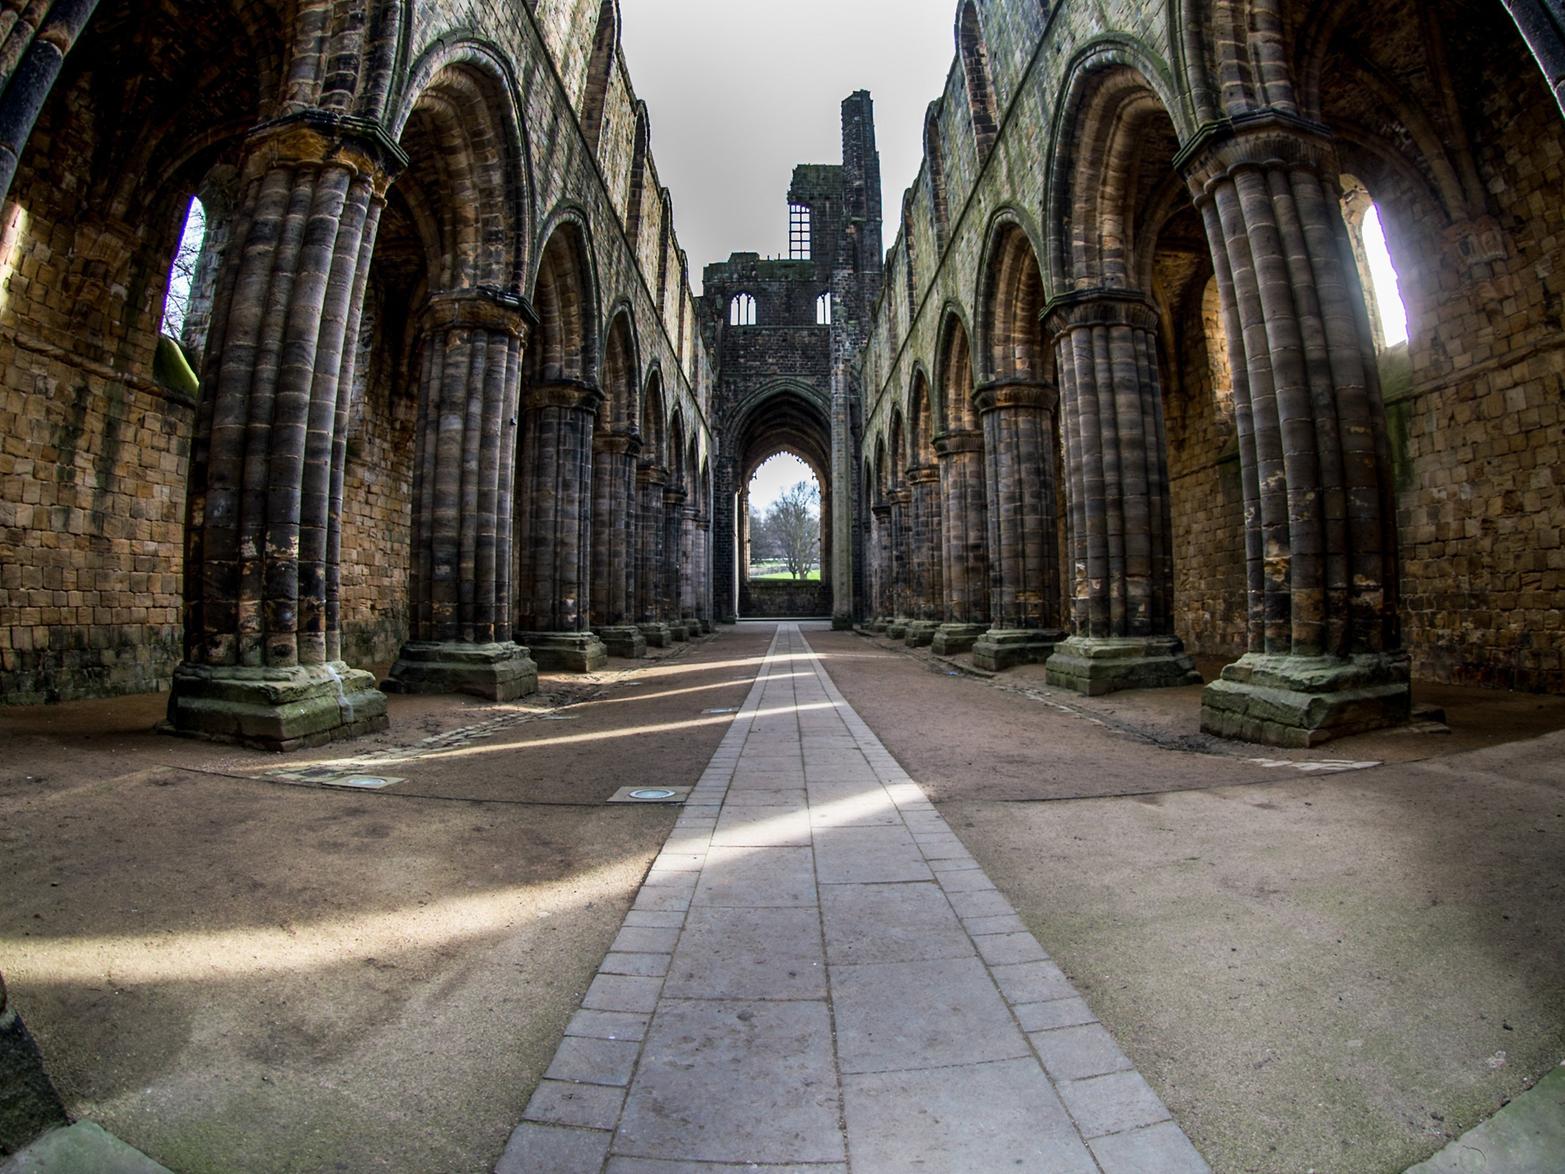 Kirkstall Abbey has stood since the 12th century and there have been sightings of ghostly monks roaming the grounds. A woman called Mary - who turned her murderous husband into the authorities - is also said to haunt the Abbey